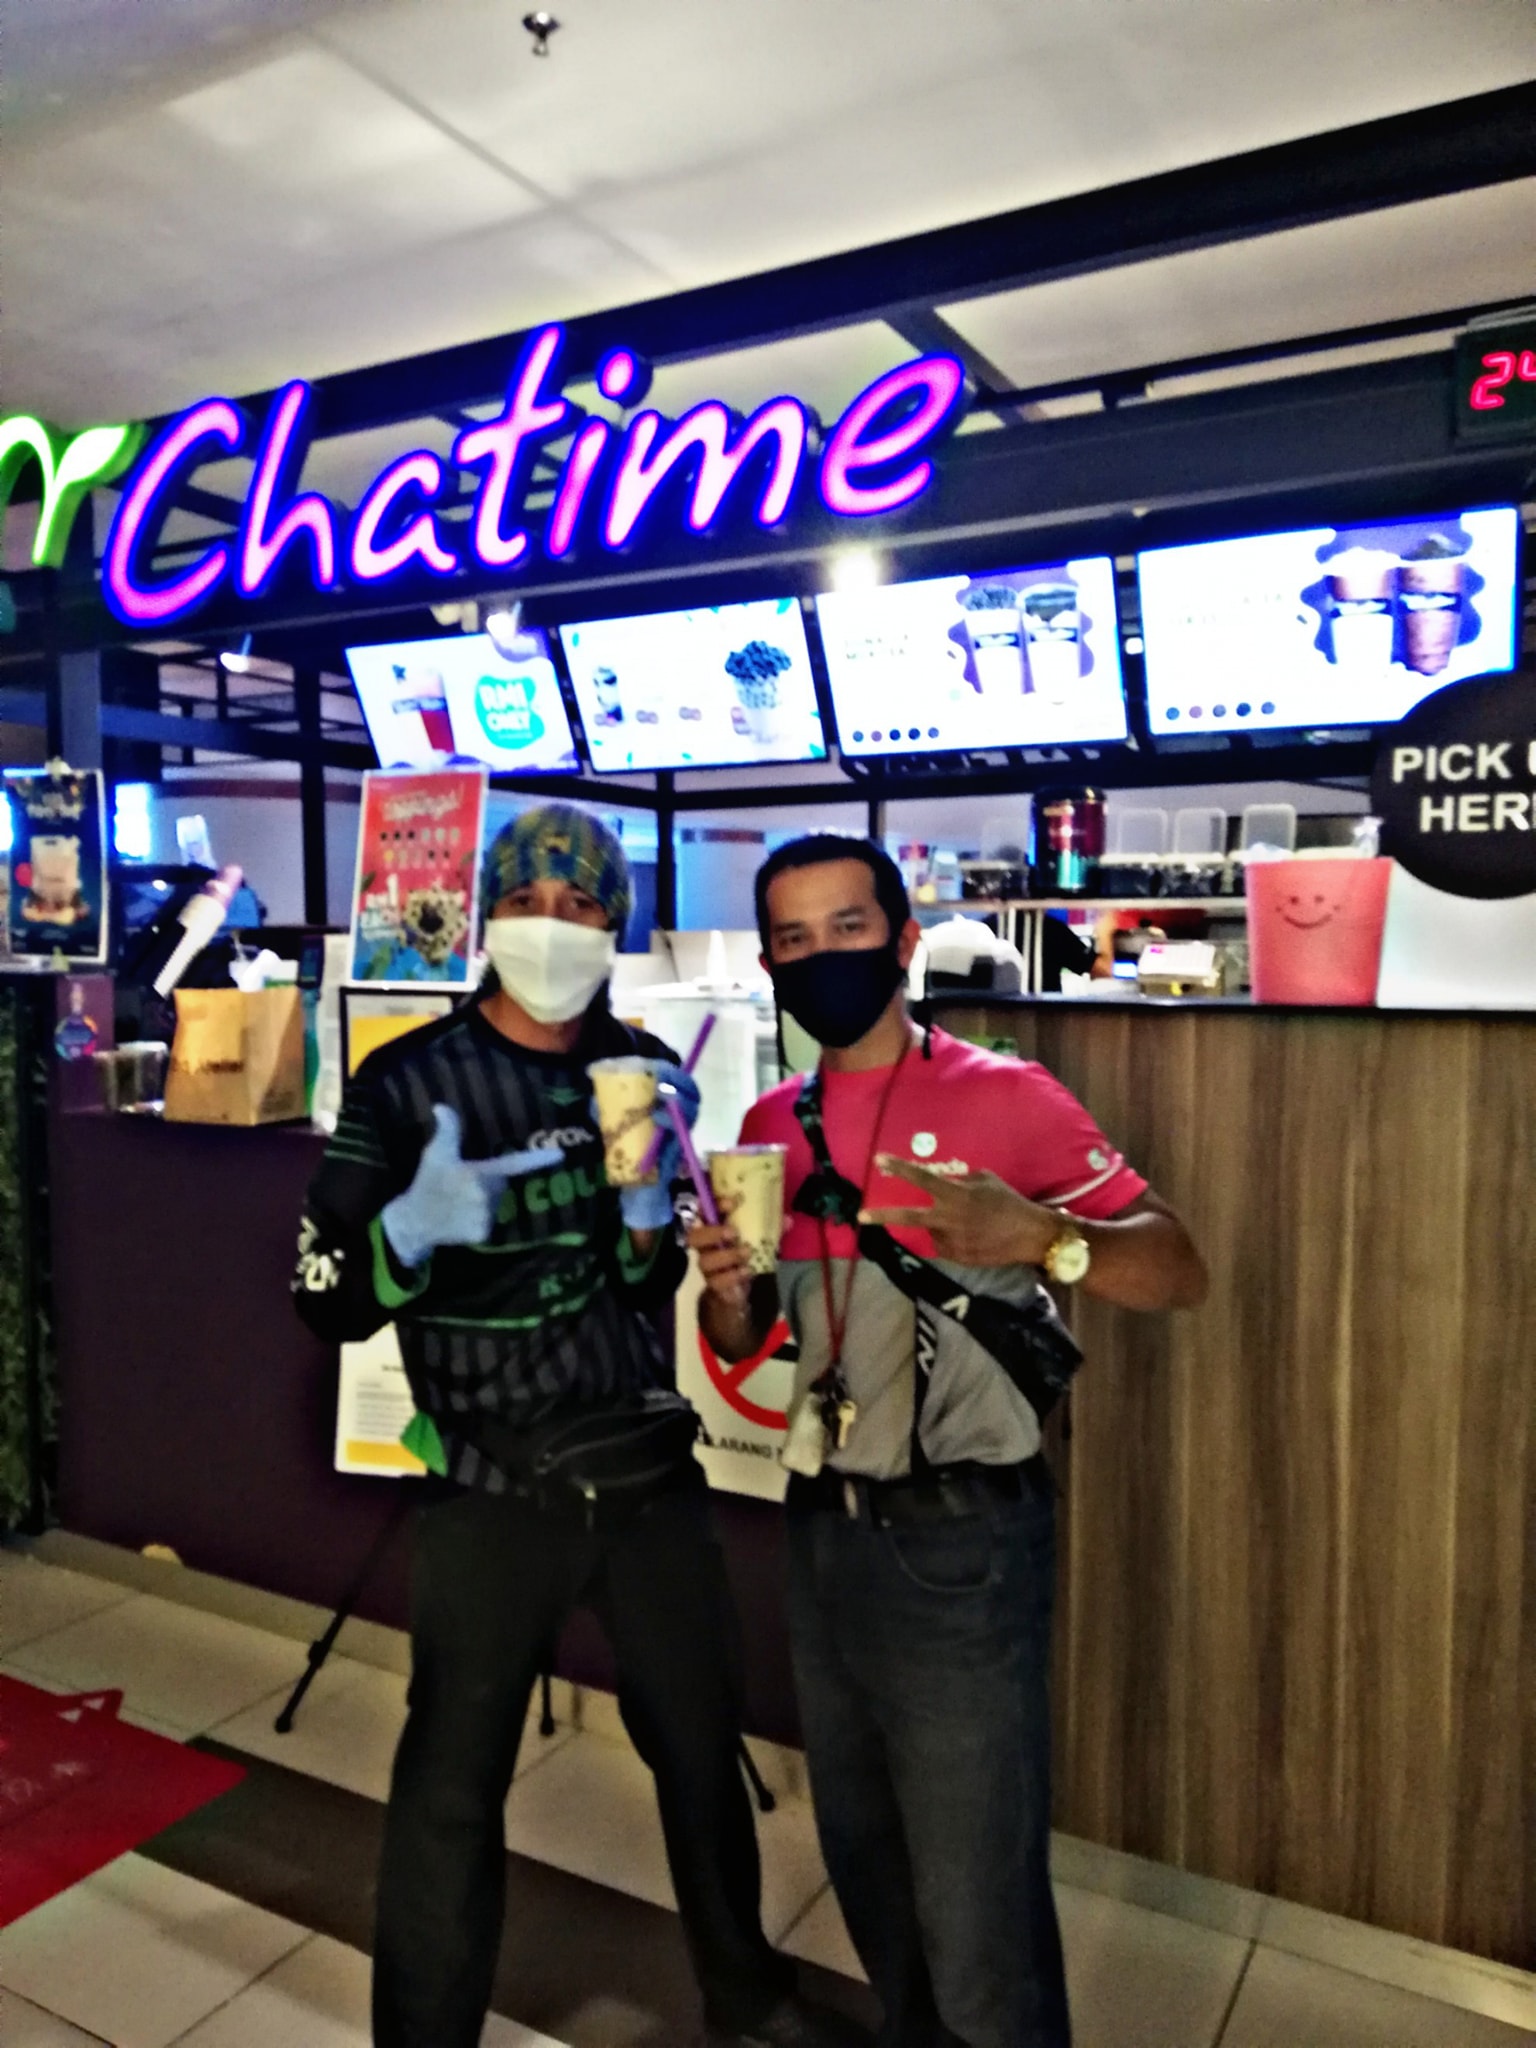 Riders at Chatime